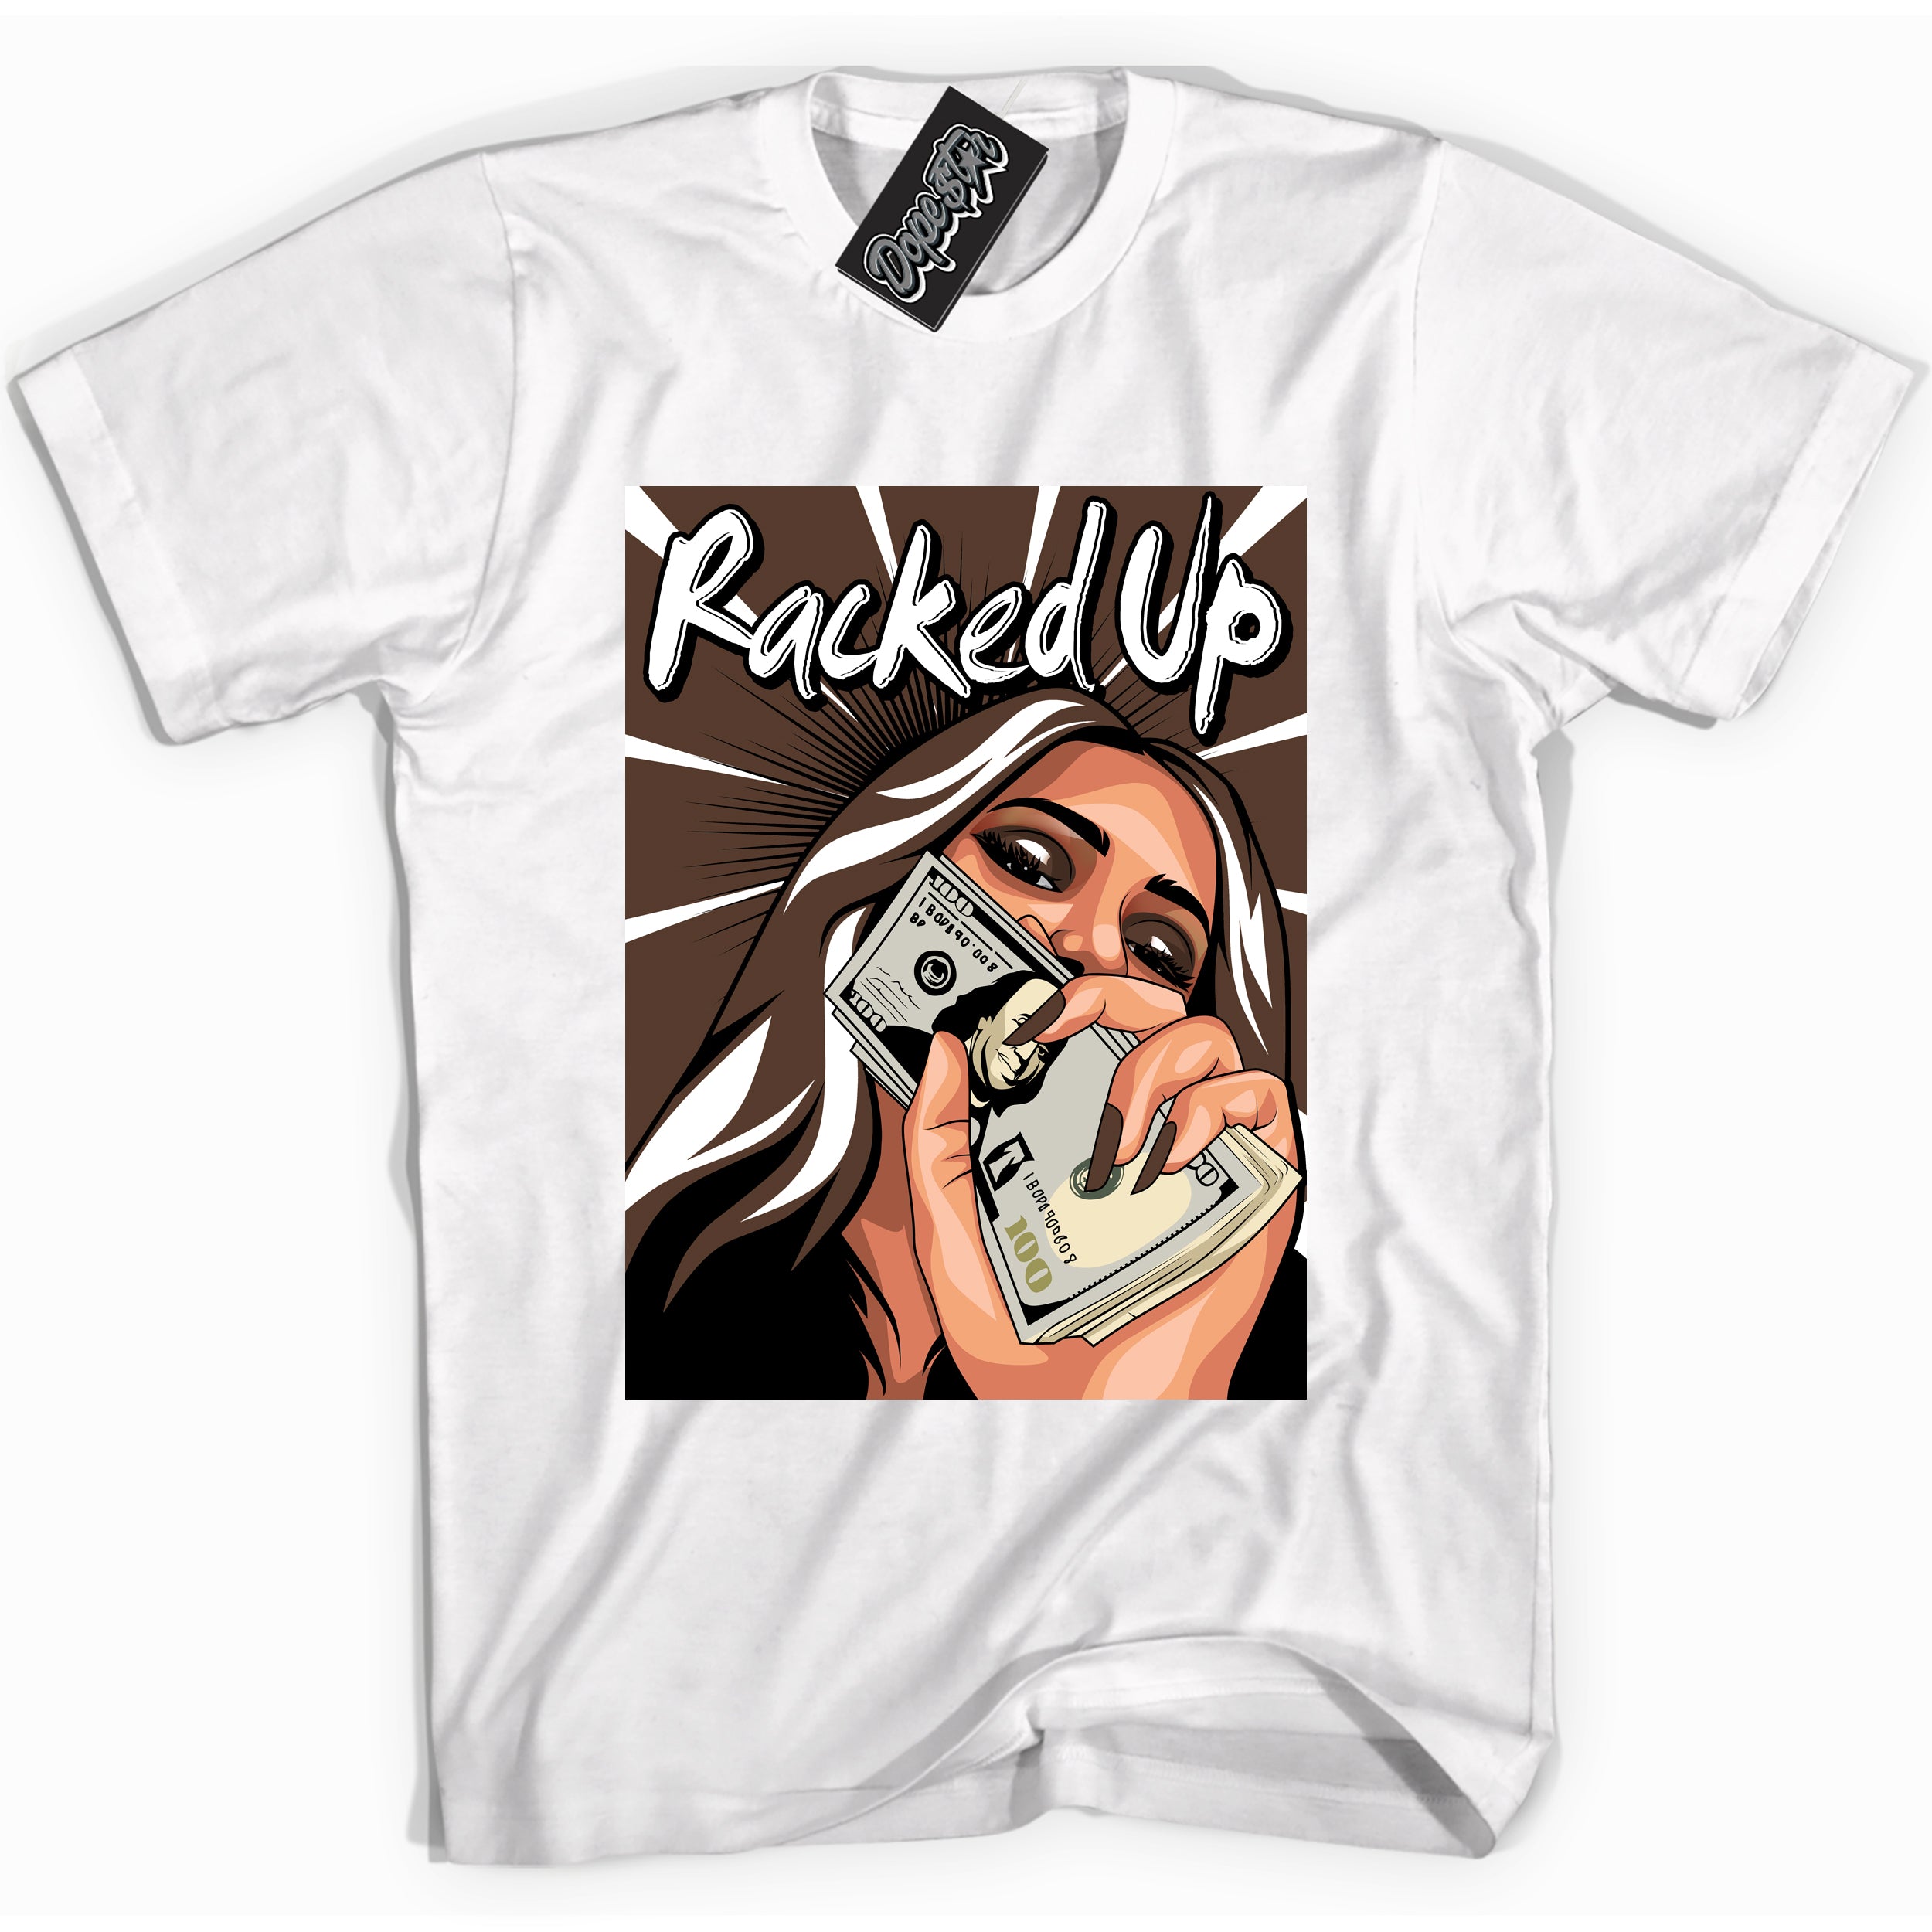 Cool White graphic tee with “ Racked Up ” design, that perfectly matches Palomino 1s sneakers 